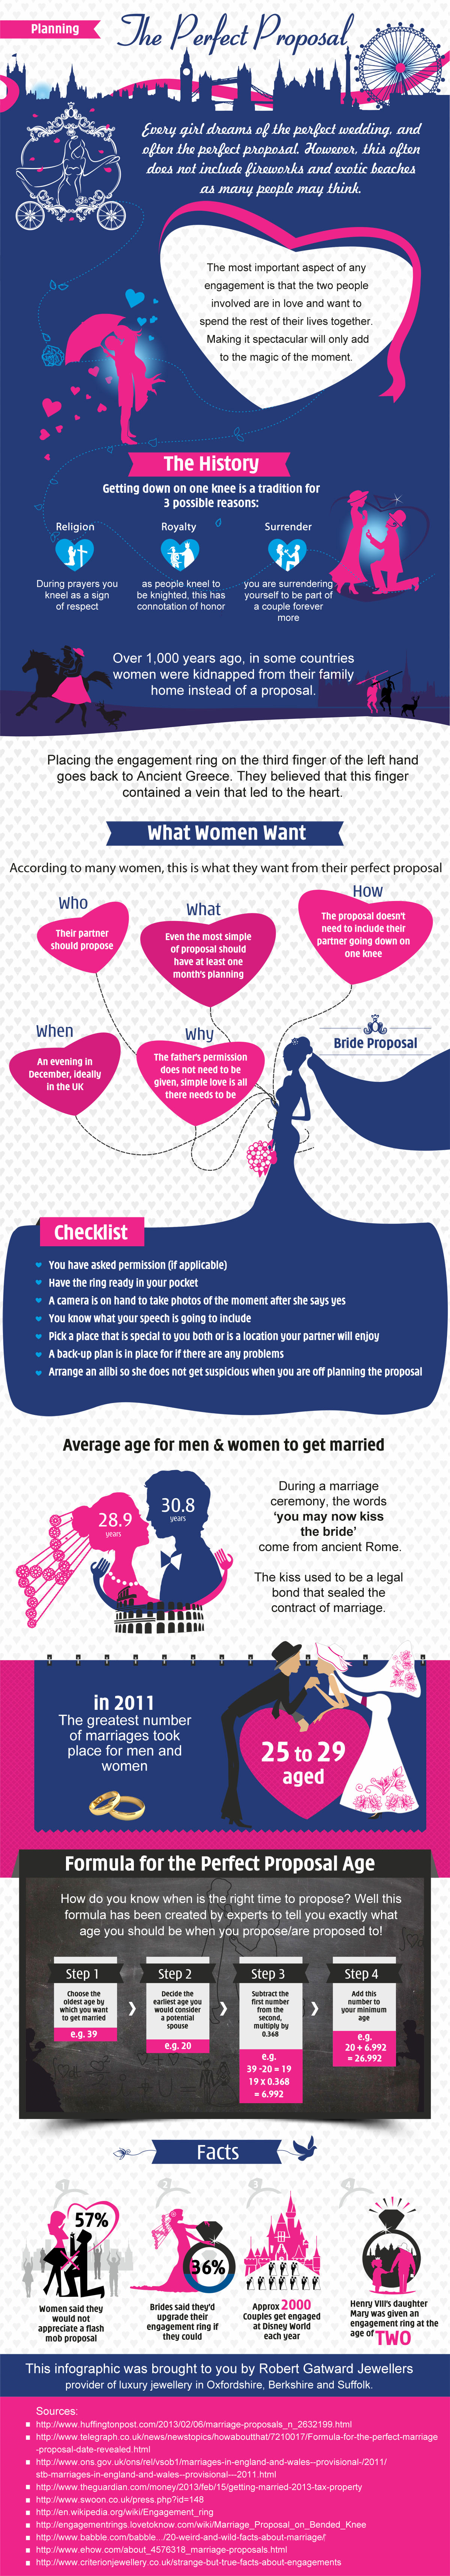 The Perfect Proposal Infographic